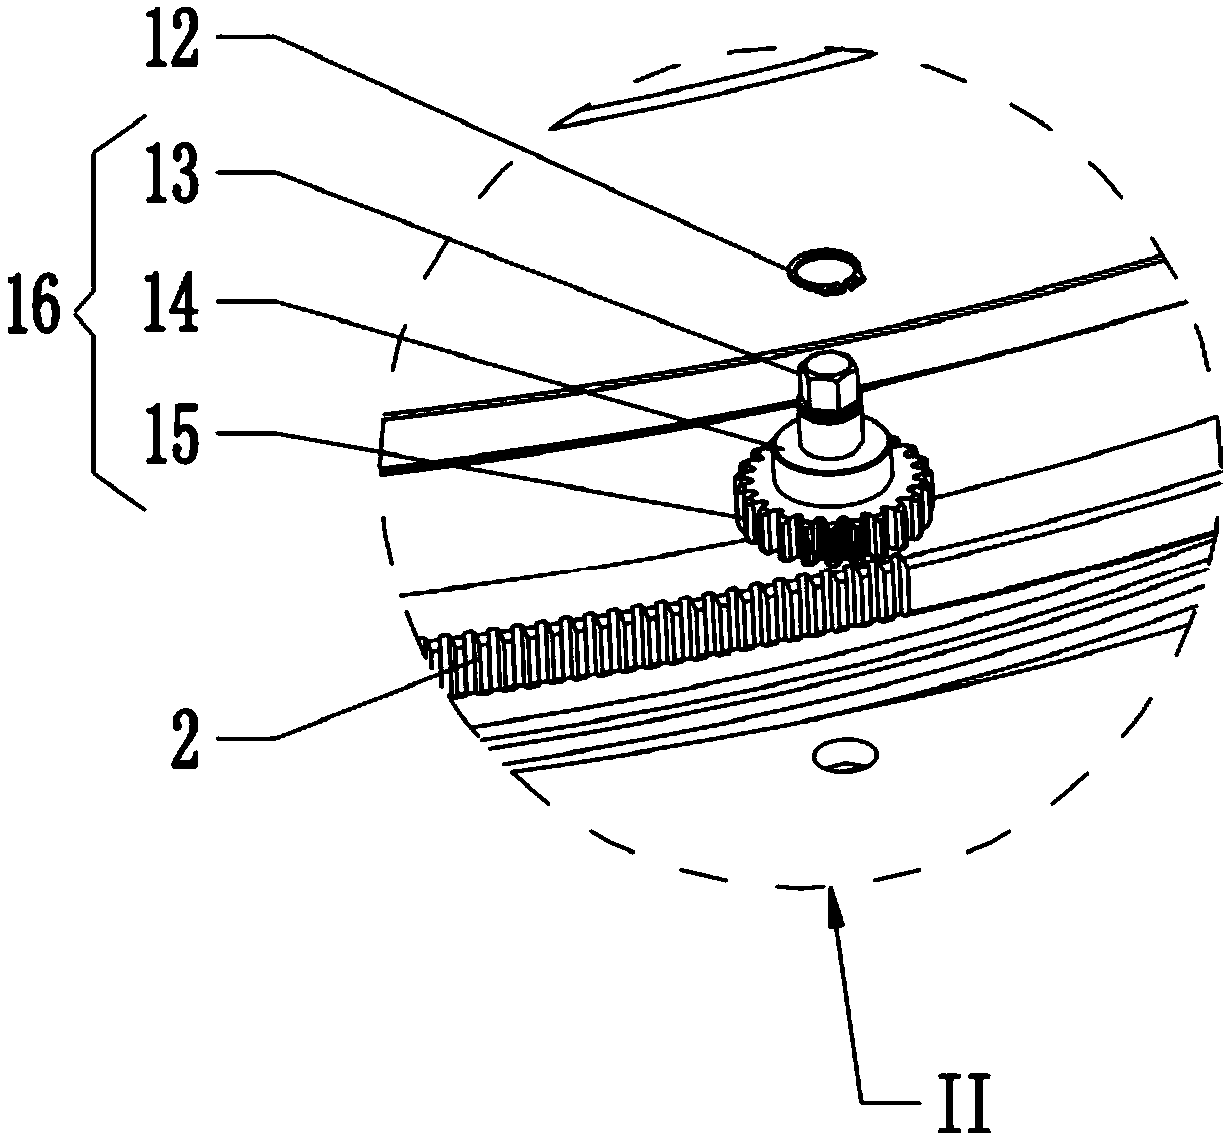 Circular knitting machine with adjustable pressure plate